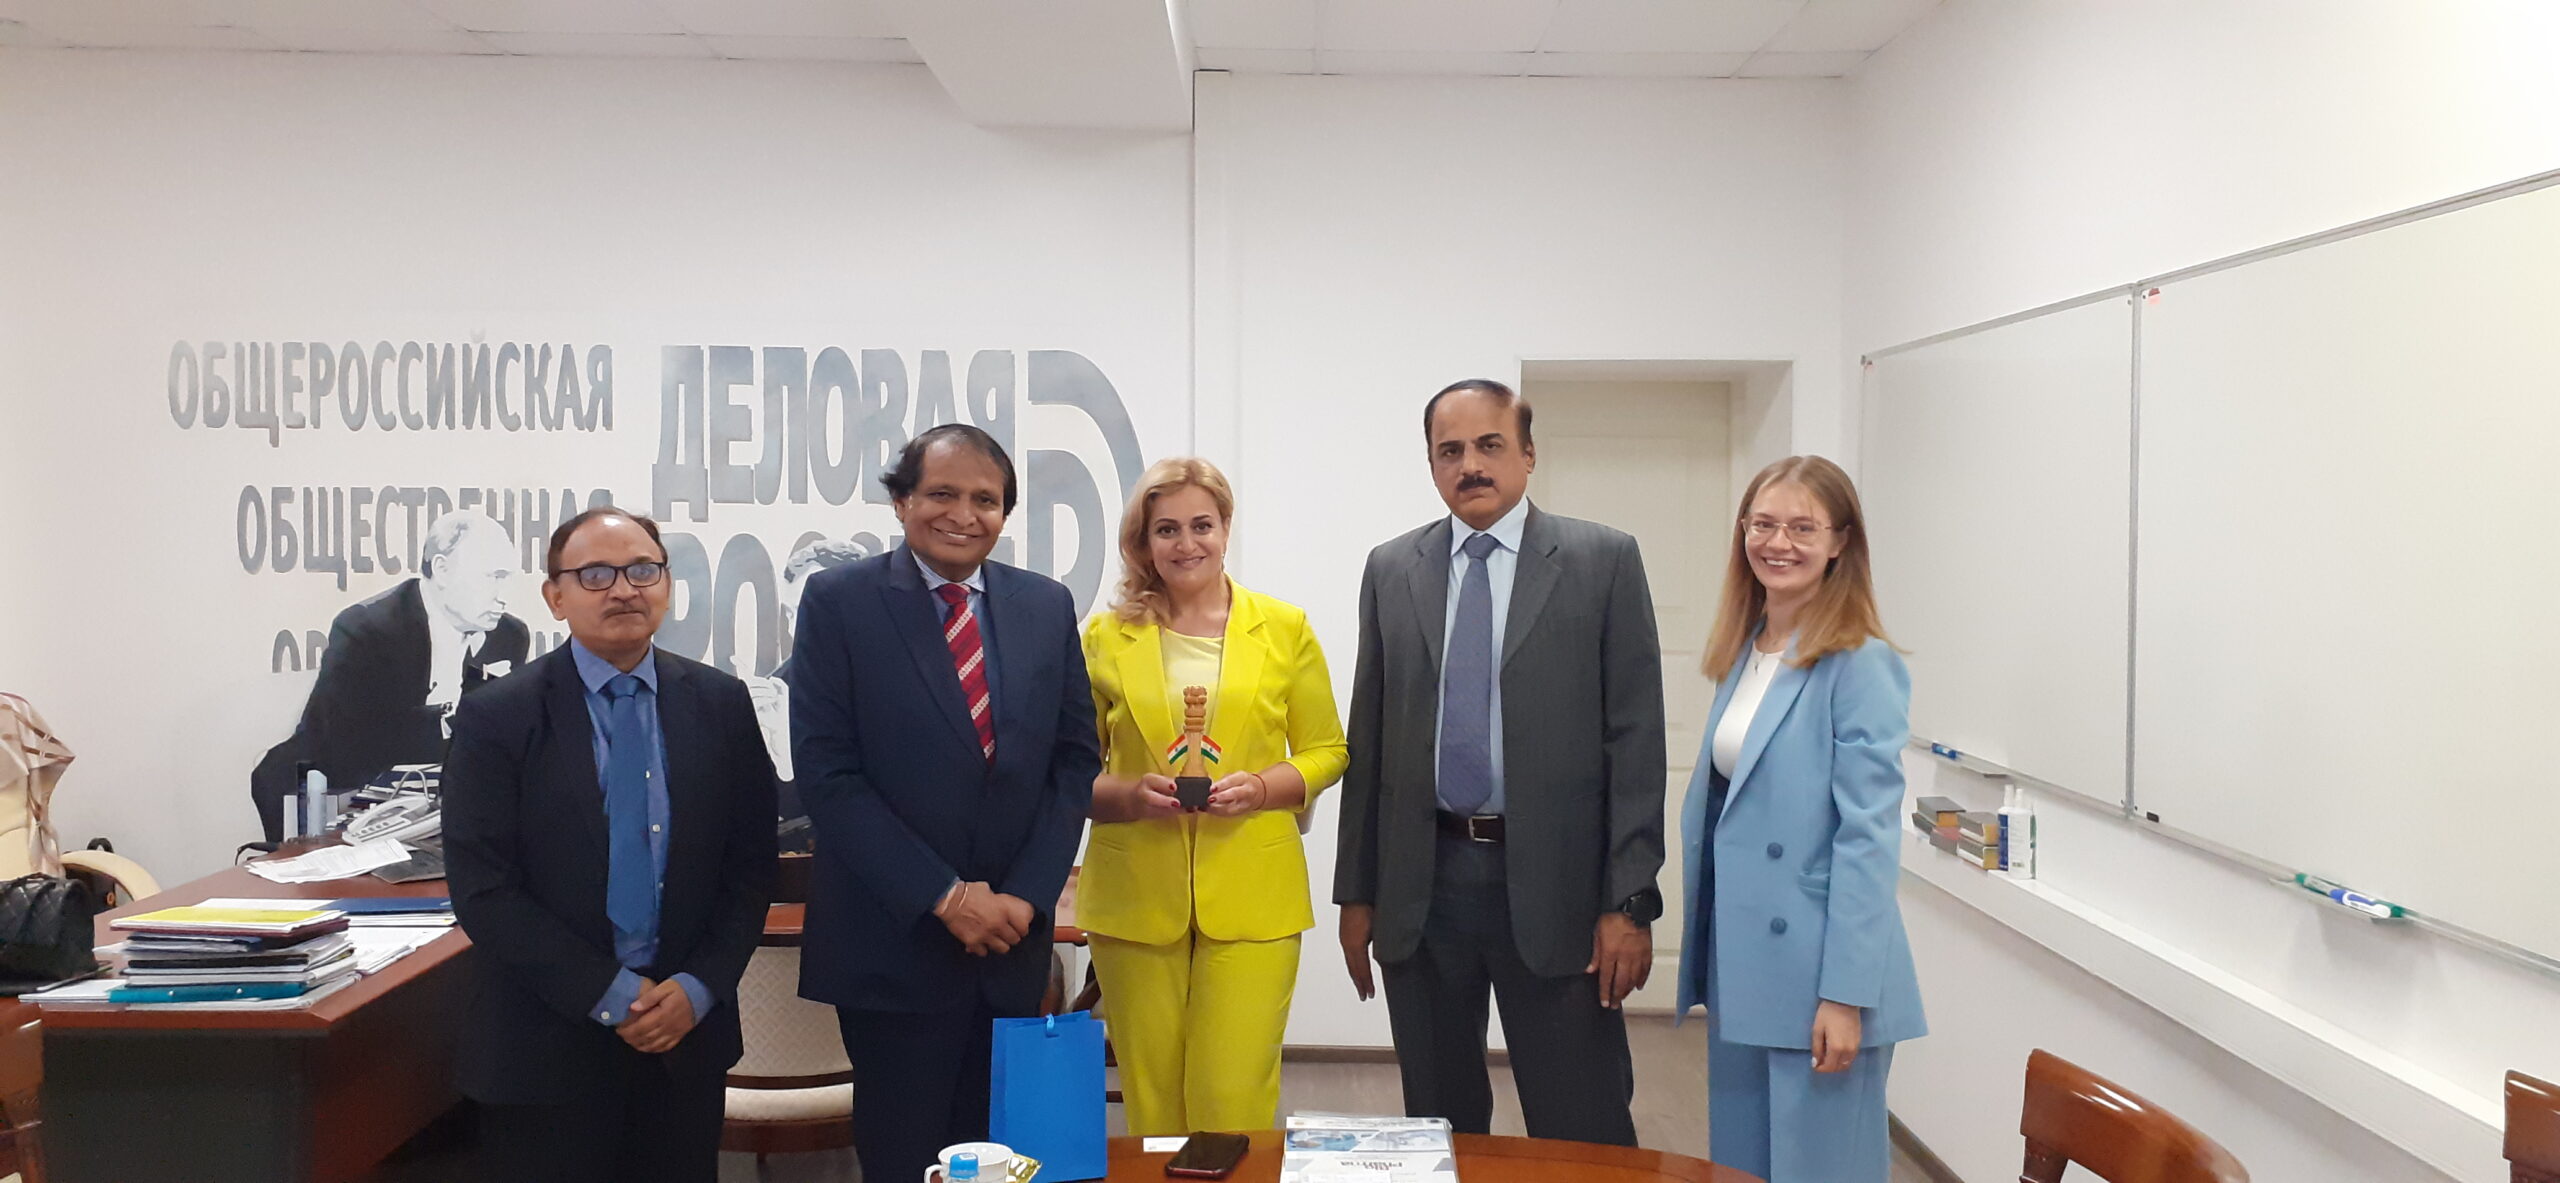 Meeting with Ms Nonna Kagramanyan,Vice President, Head of Executive Board,Member of the General Council of Business Russia. They have in principle agreed to support Chemtech World Expo 2024